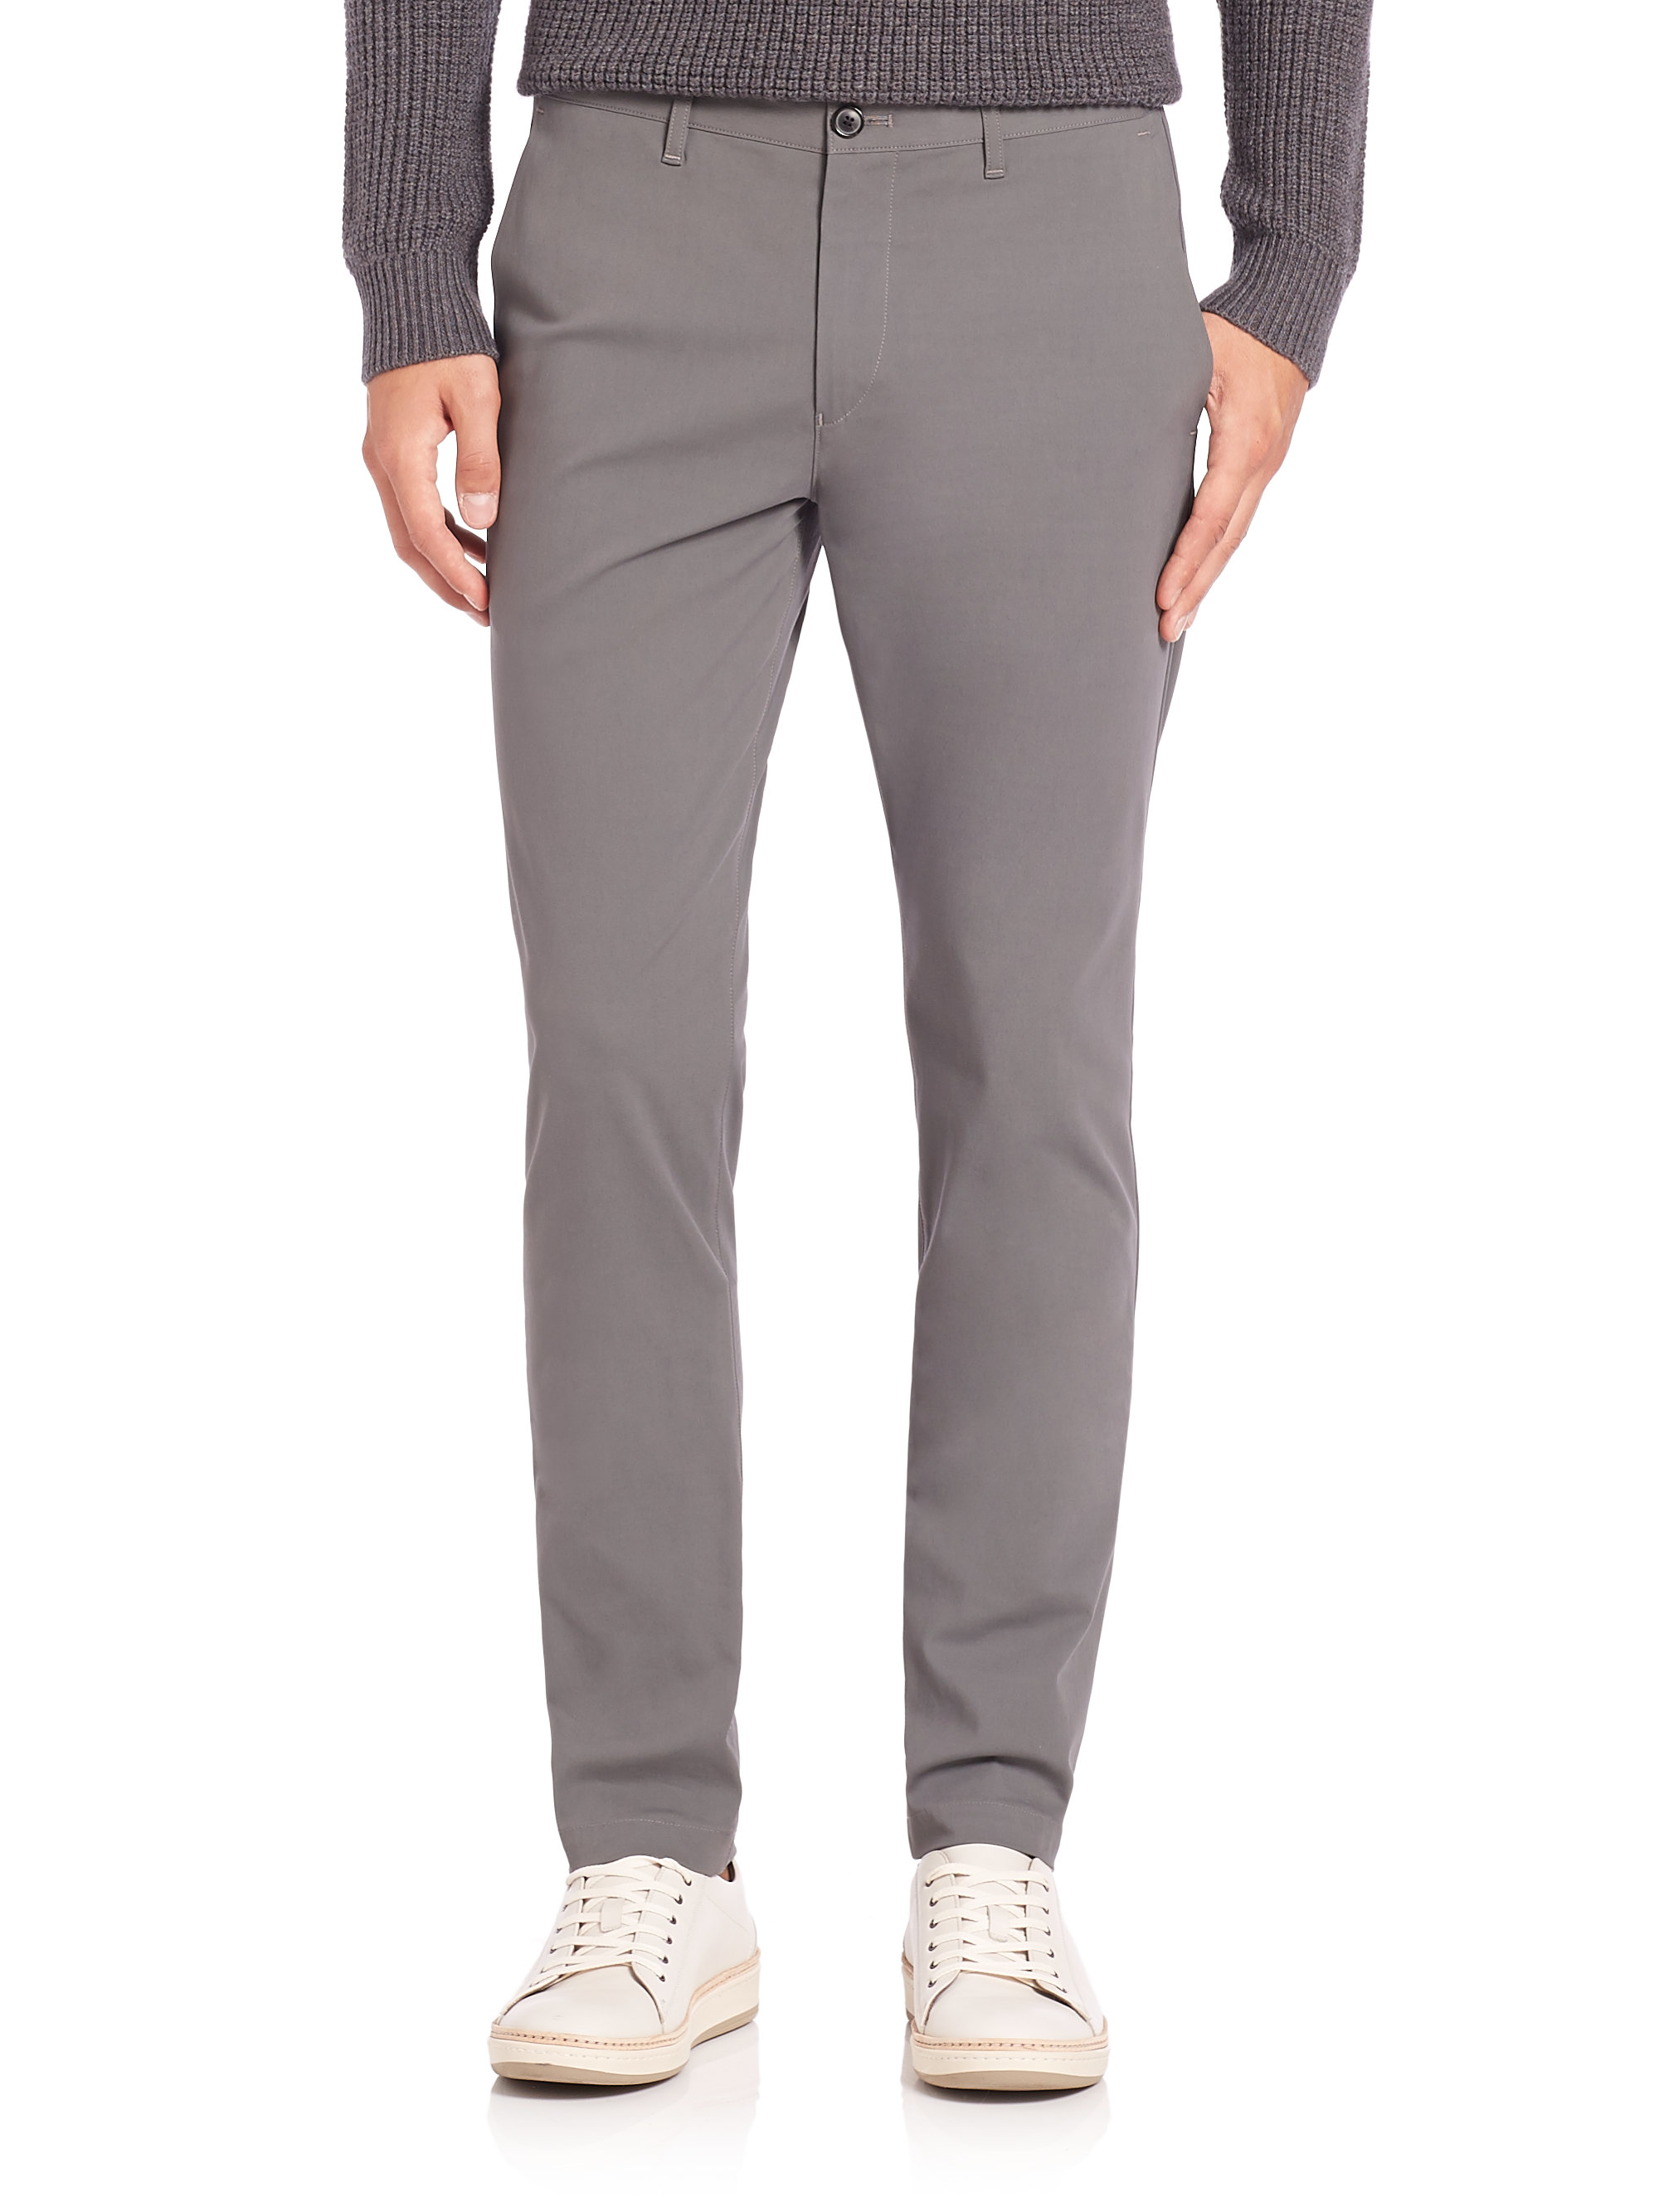 Lyst - Theory Zaine Witten Flat-front Pants in Gray for Men